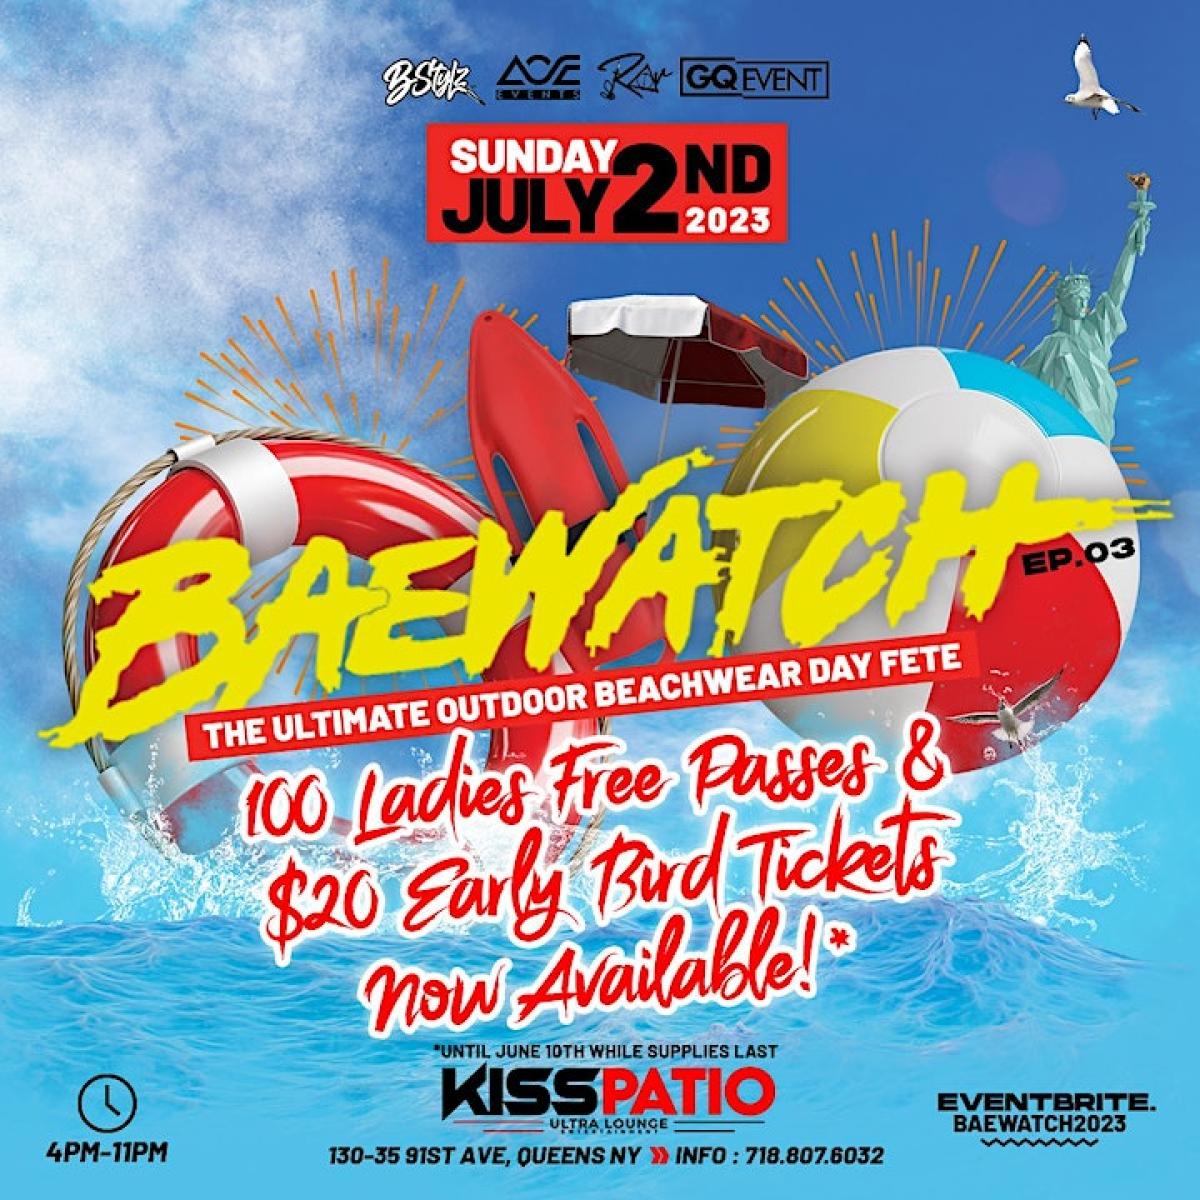 Baewatch flyer or graphic.